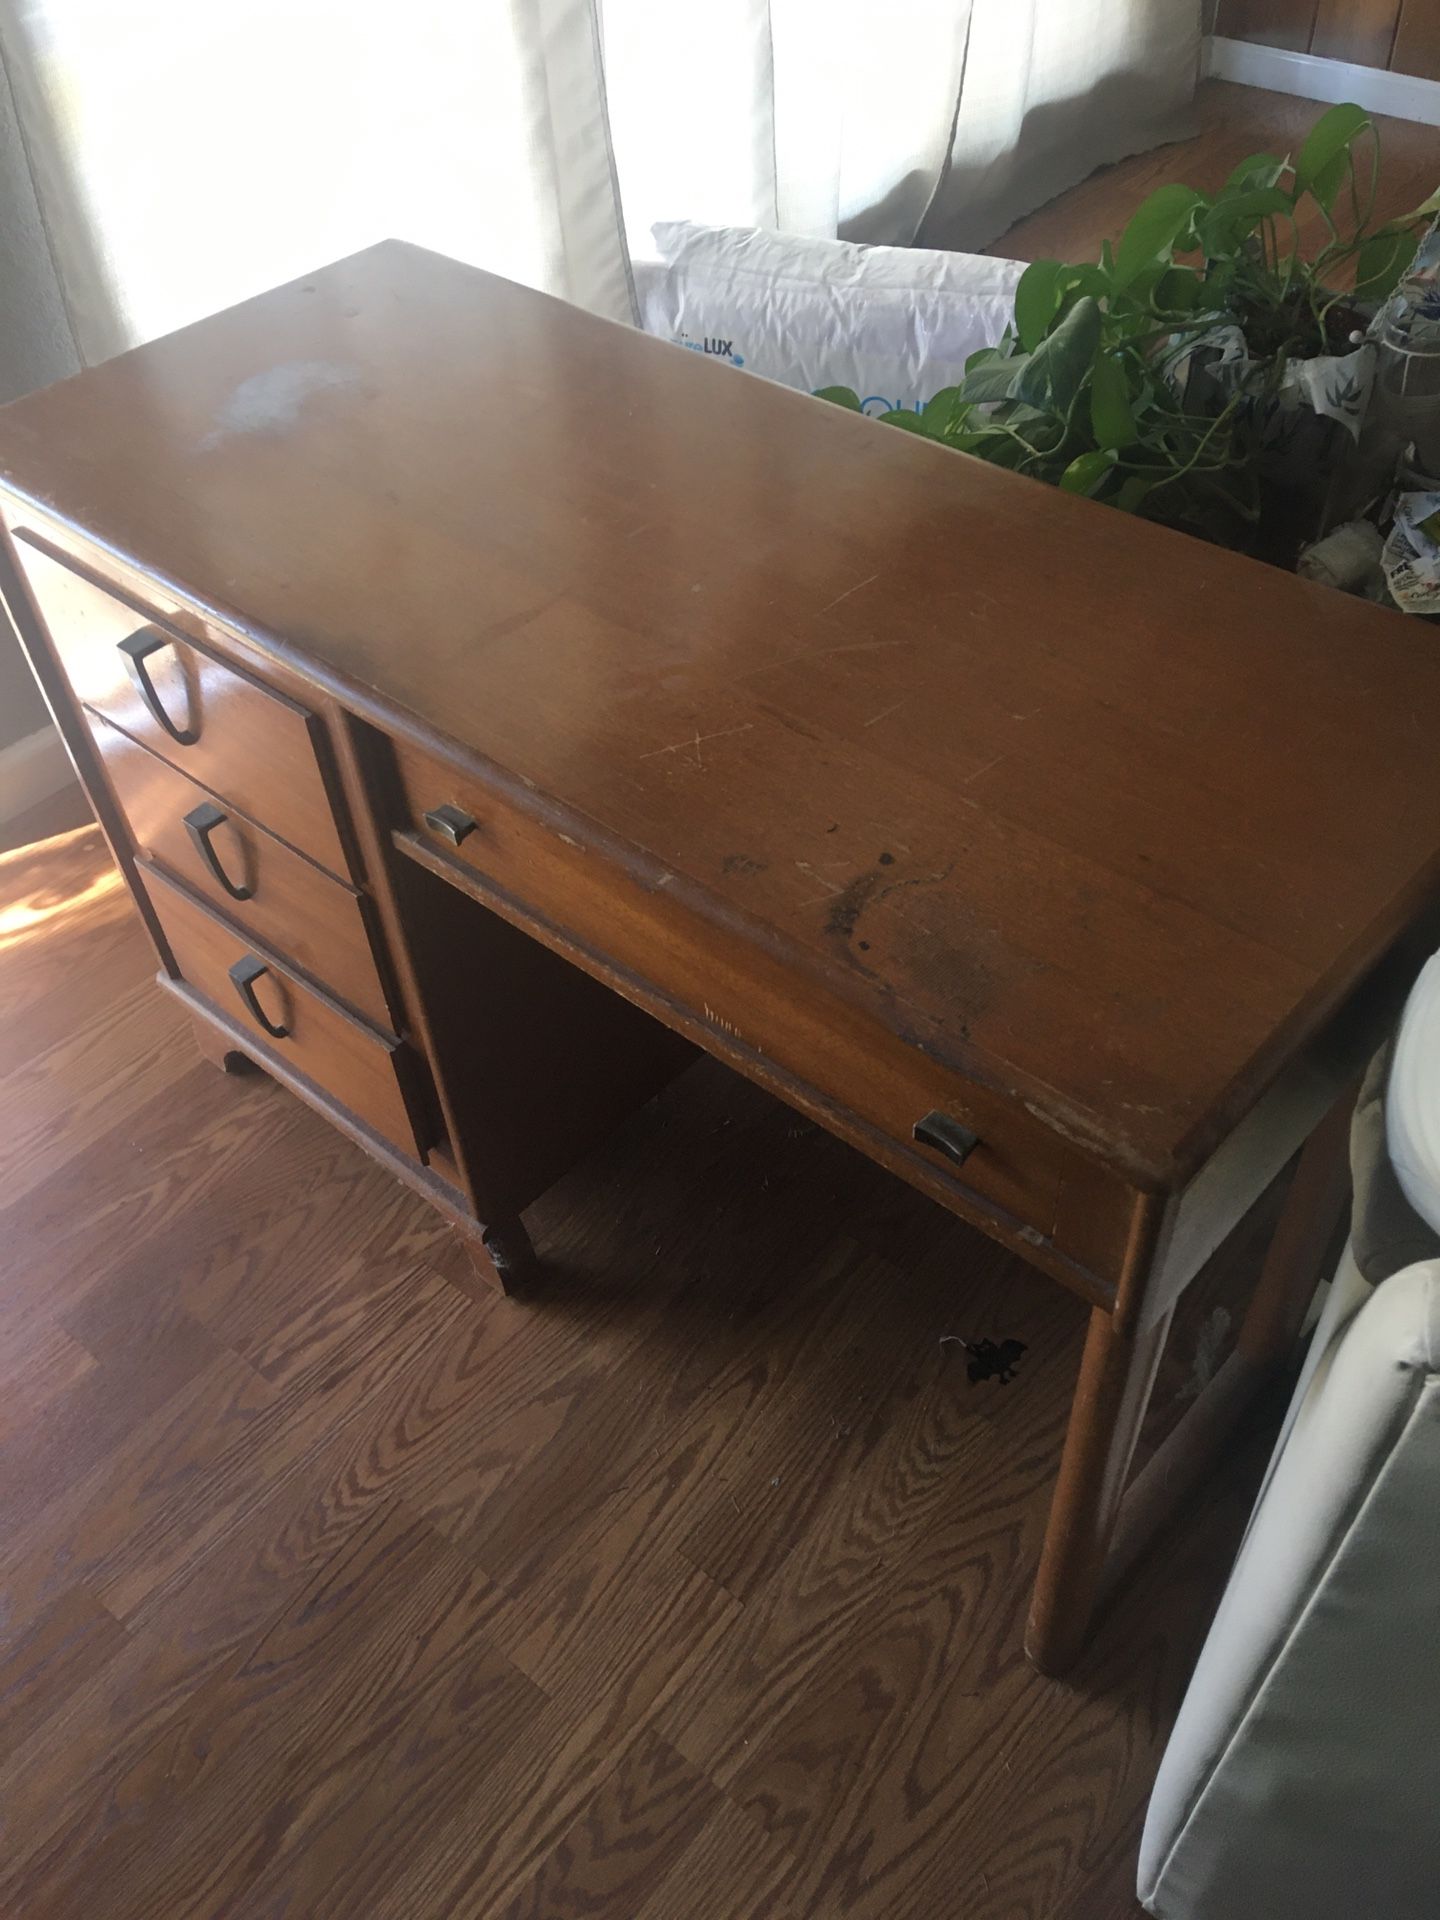 Used small desk - FREE - solid wood